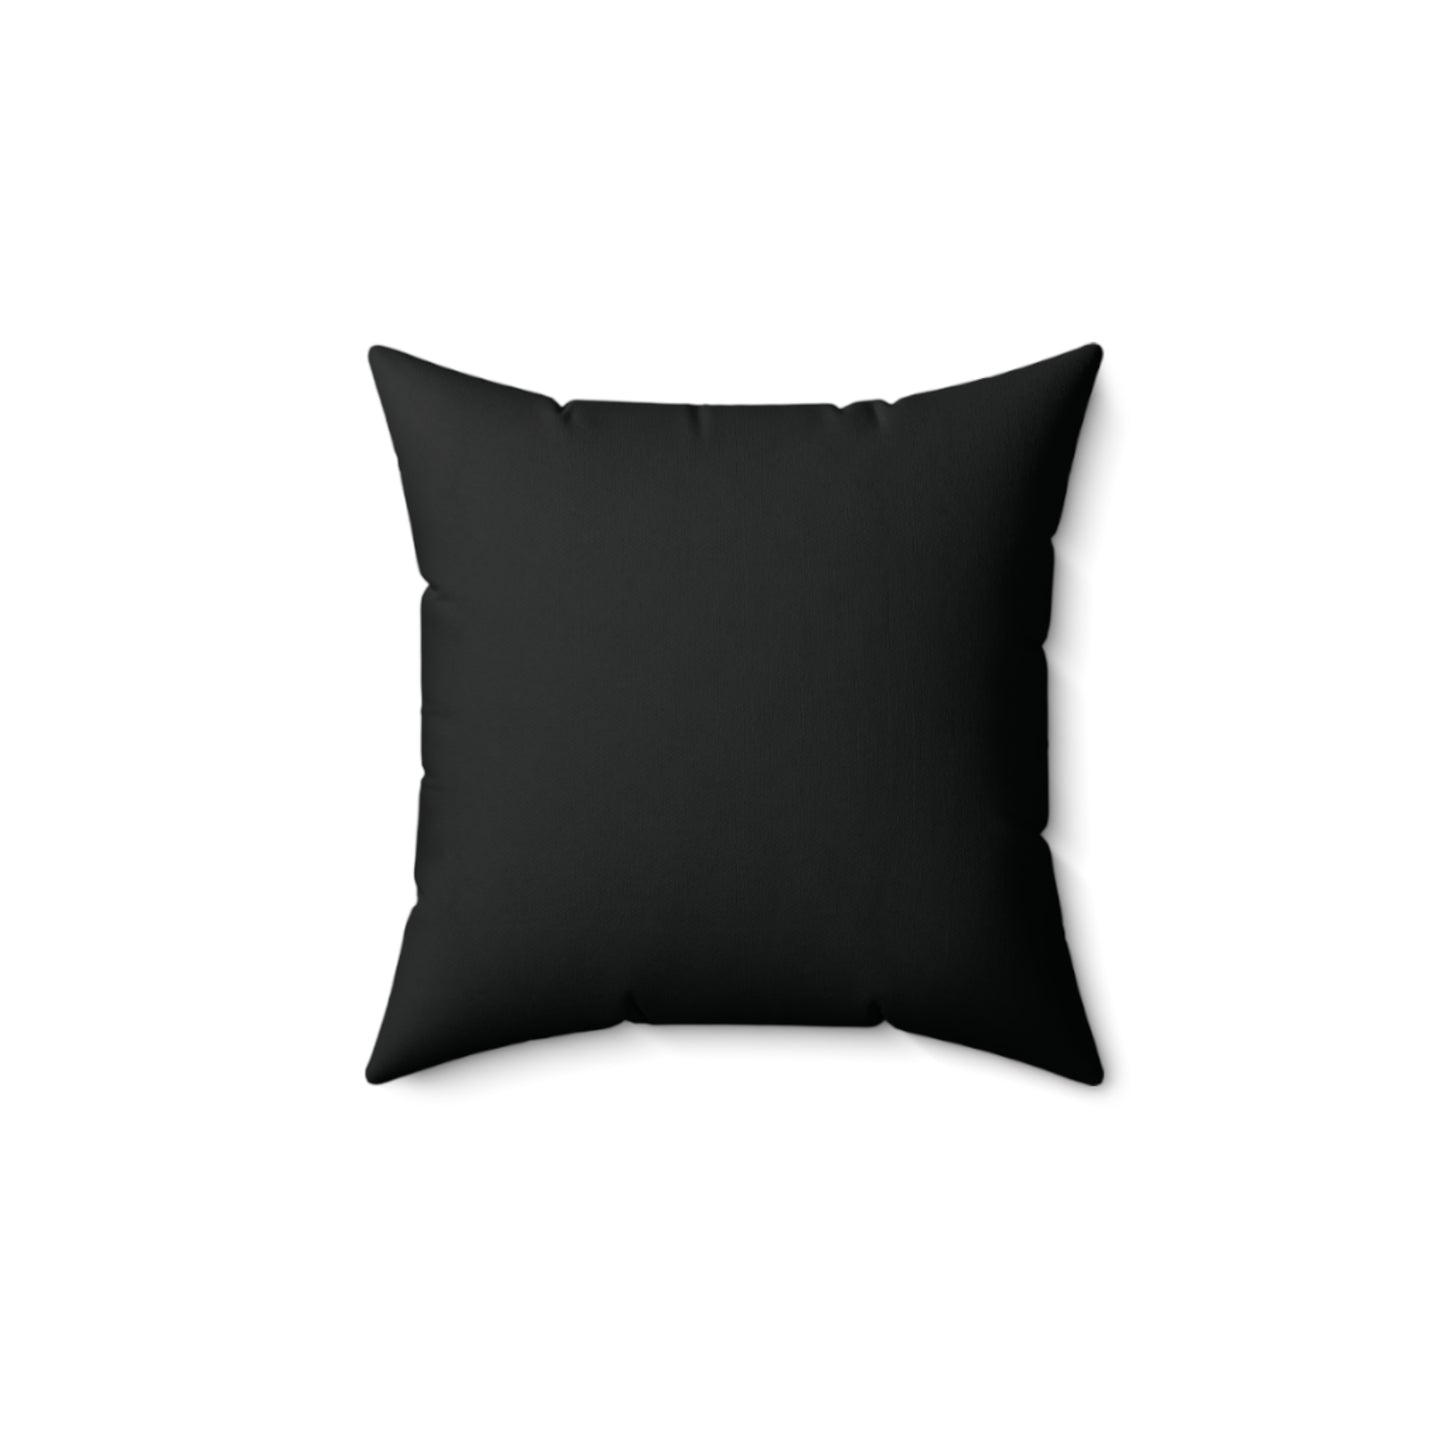 Homeschool Mom Square Pillow - "Cool Homeschool Mom: Proud But Exhausted"